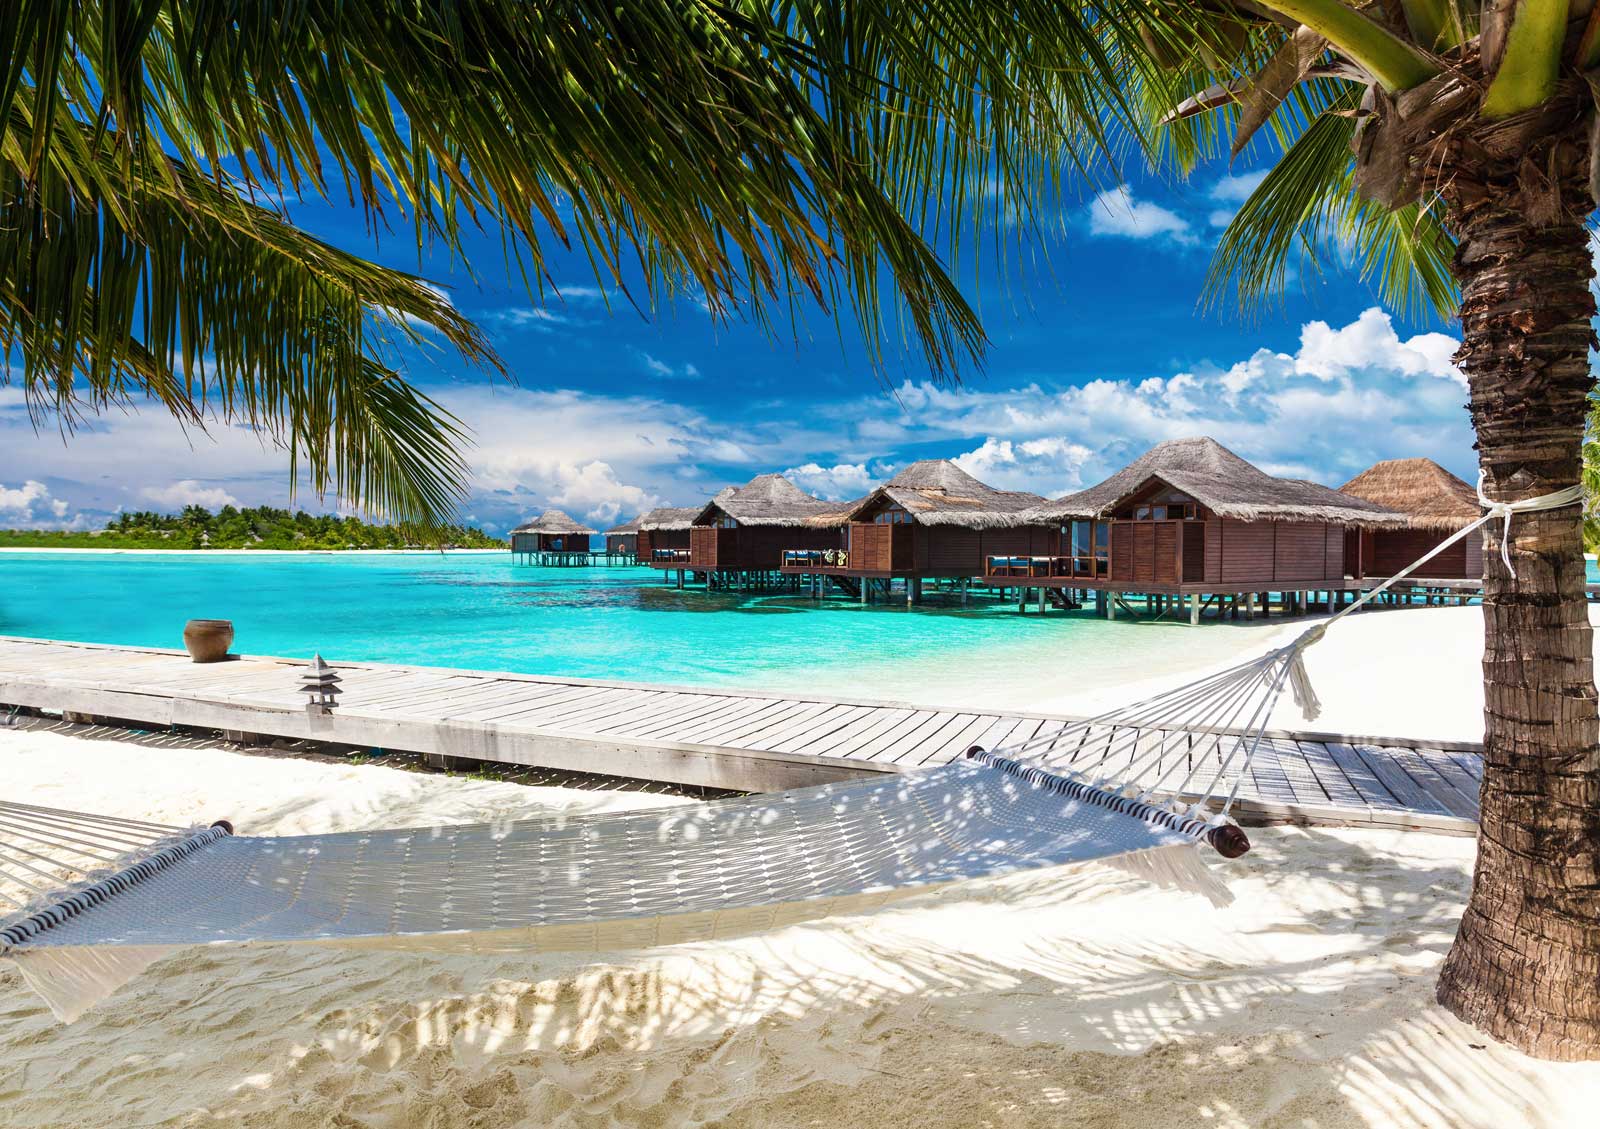 15 Best Overwater Bungalows in the Caribbean in 2023 - ExploreLearnMore